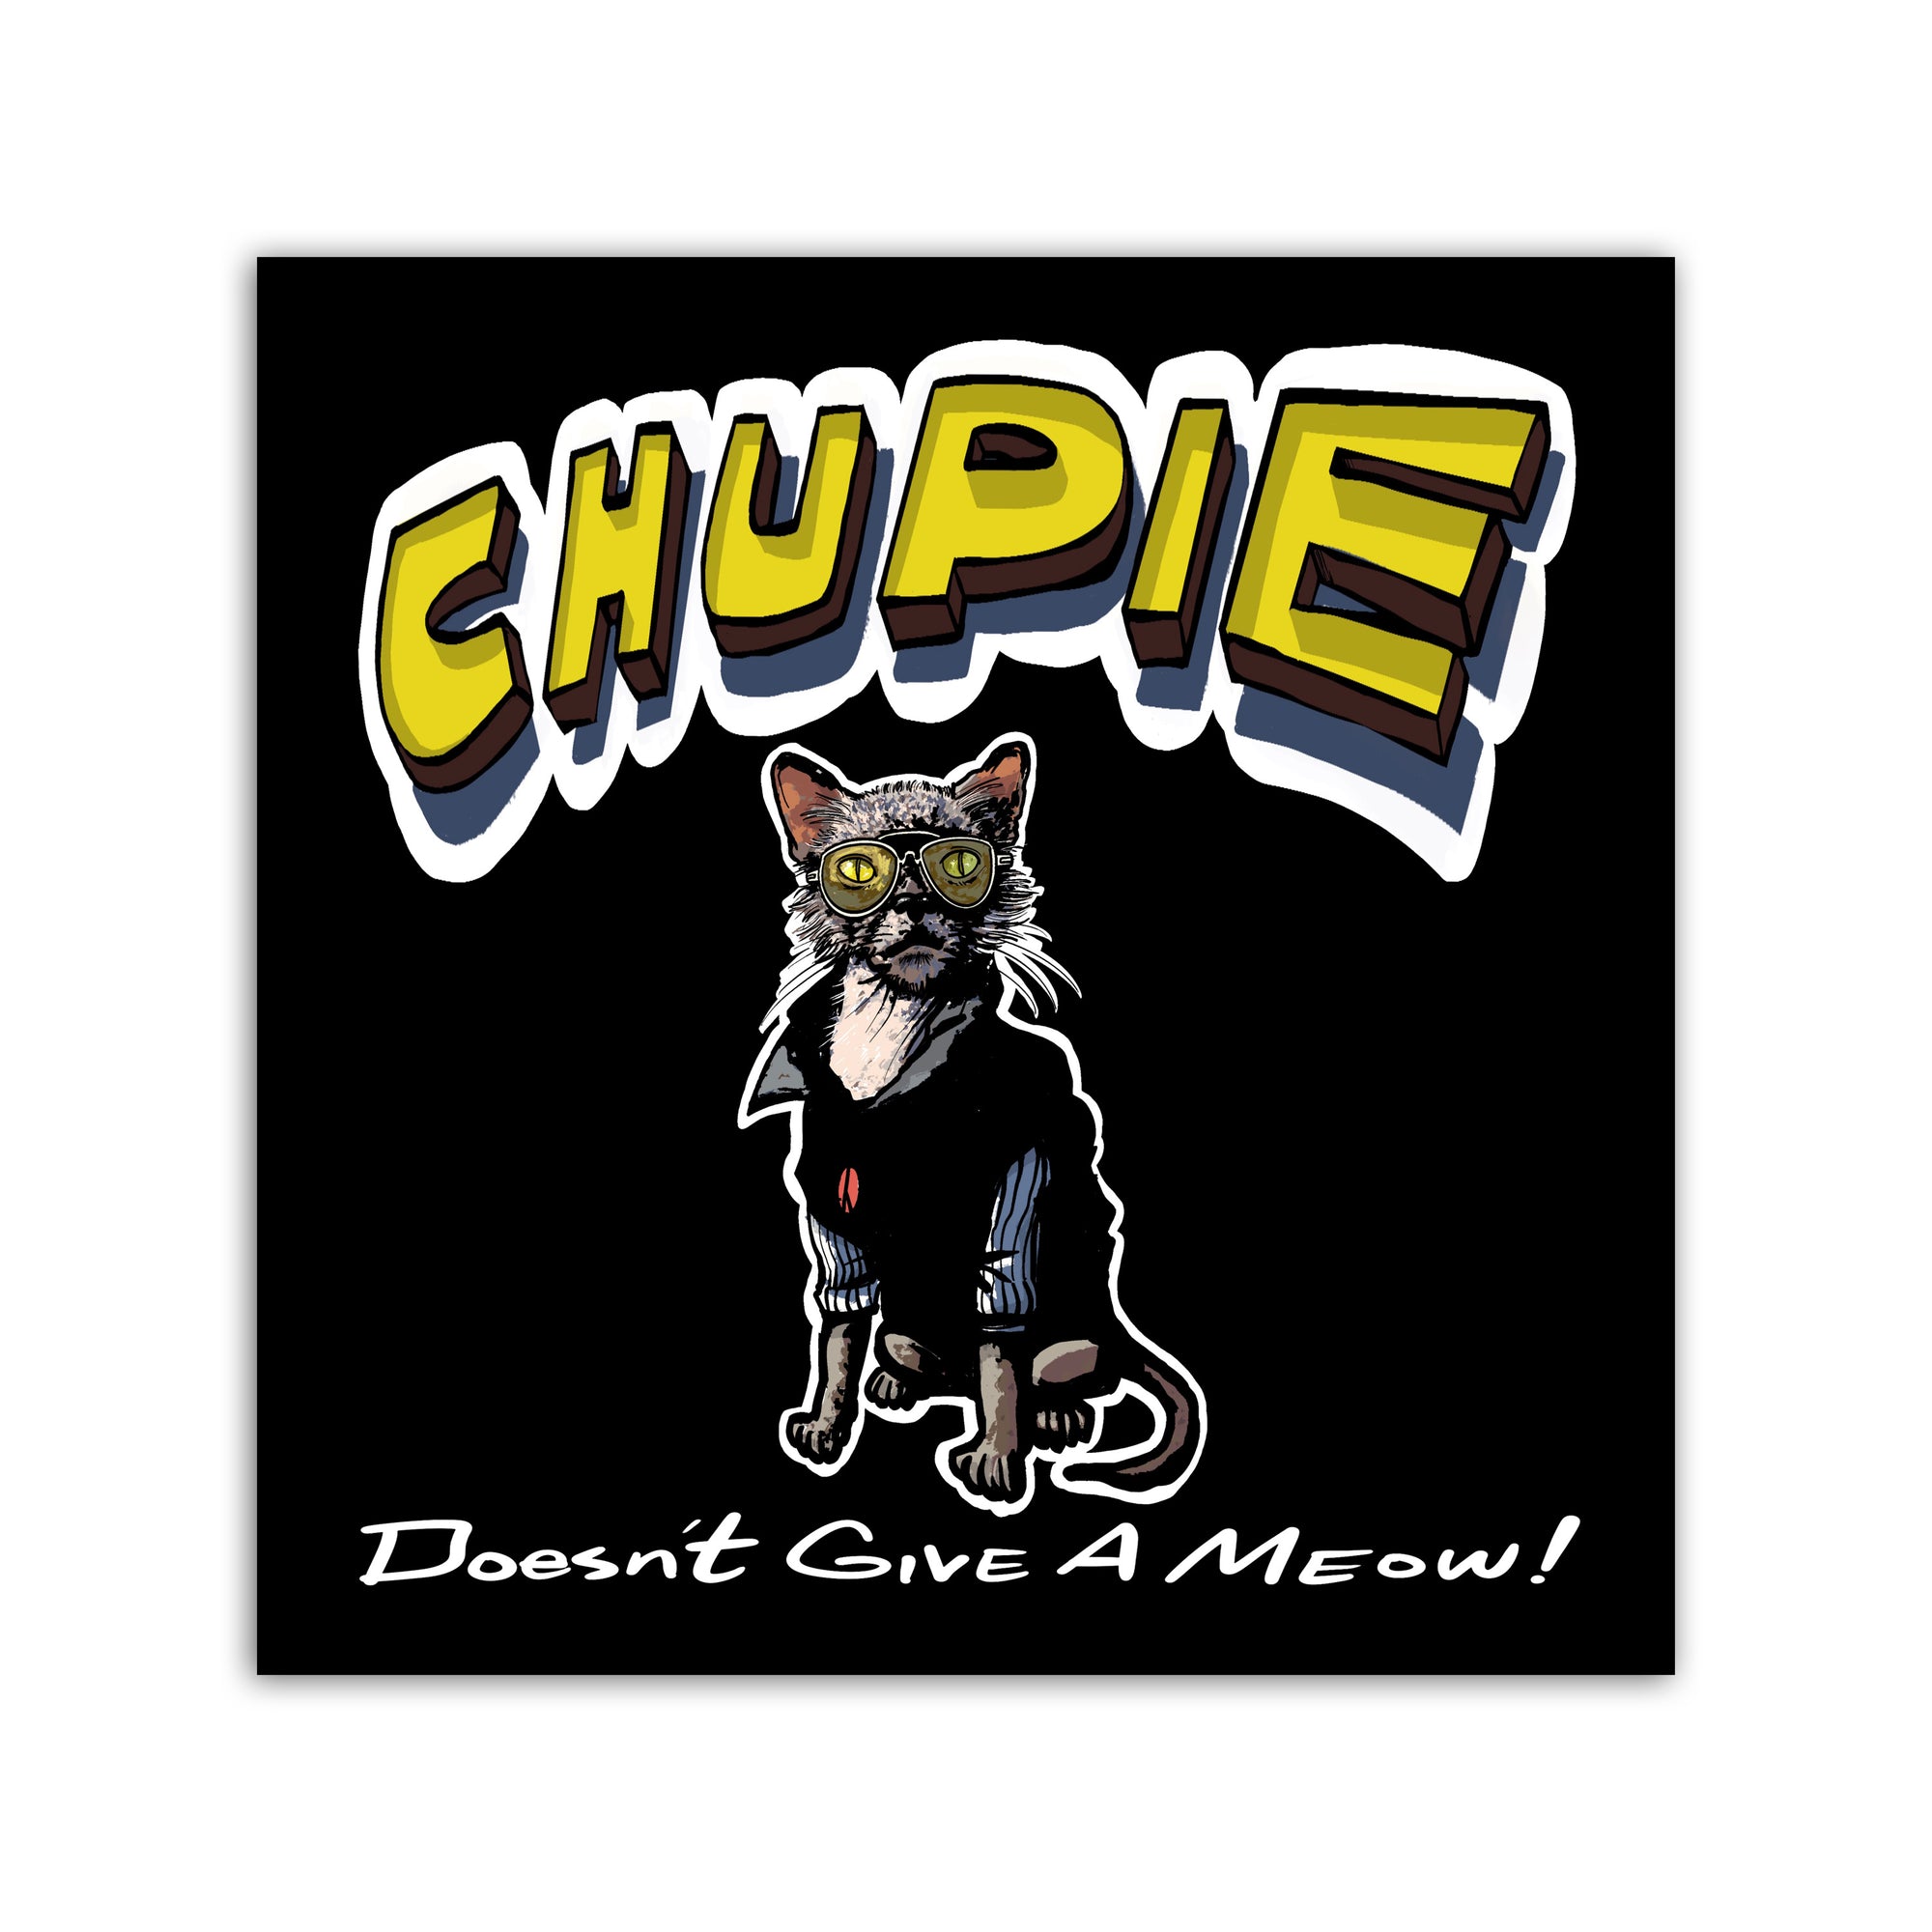 Chupie Doesn't Give A Meow Sticker